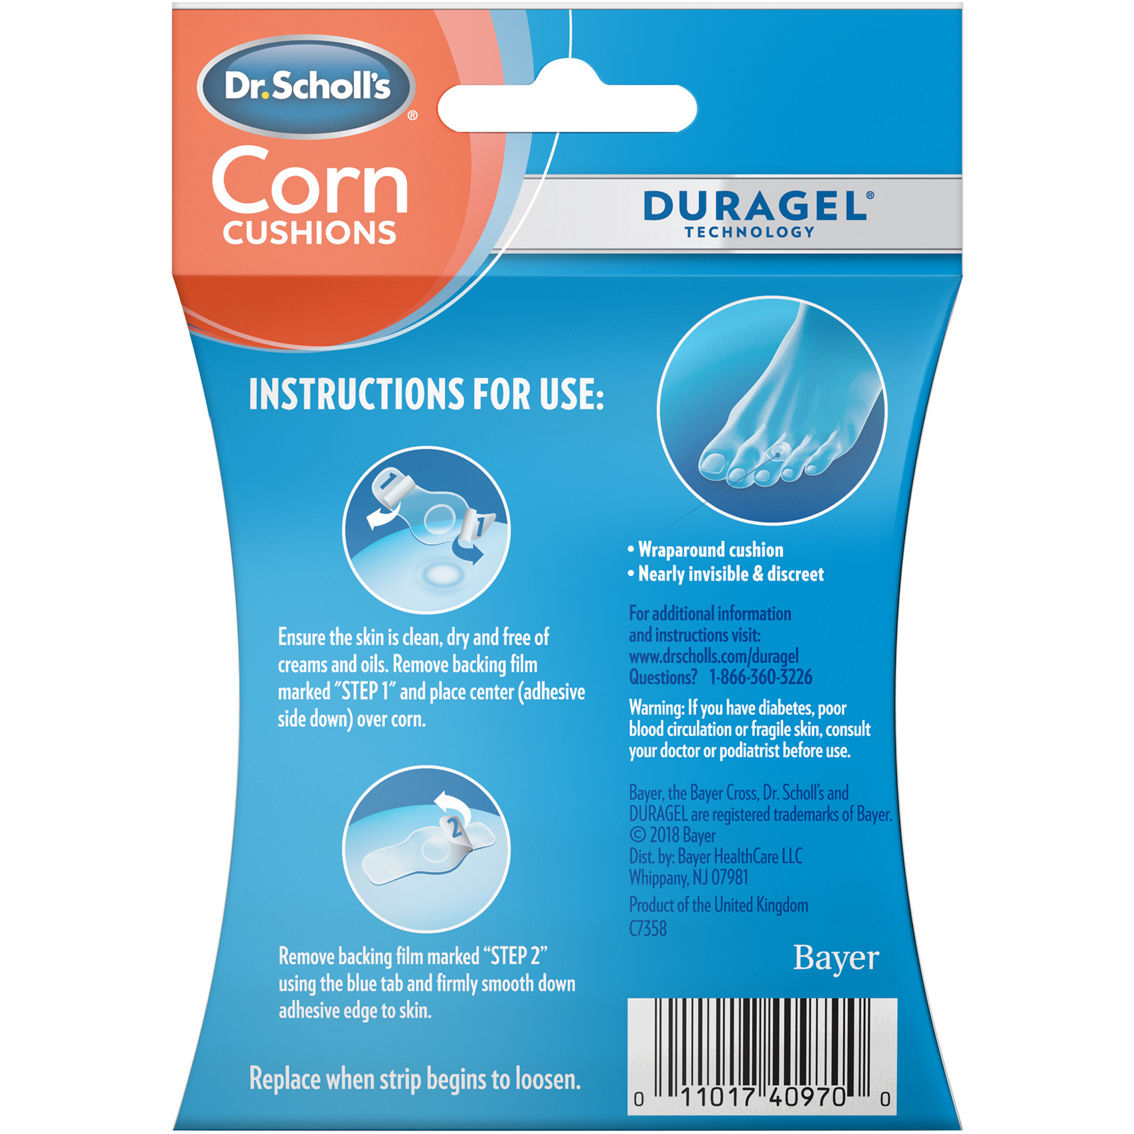 Dr. Scholl's Corn Cushions With Duragel Technology - Image 2 of 2